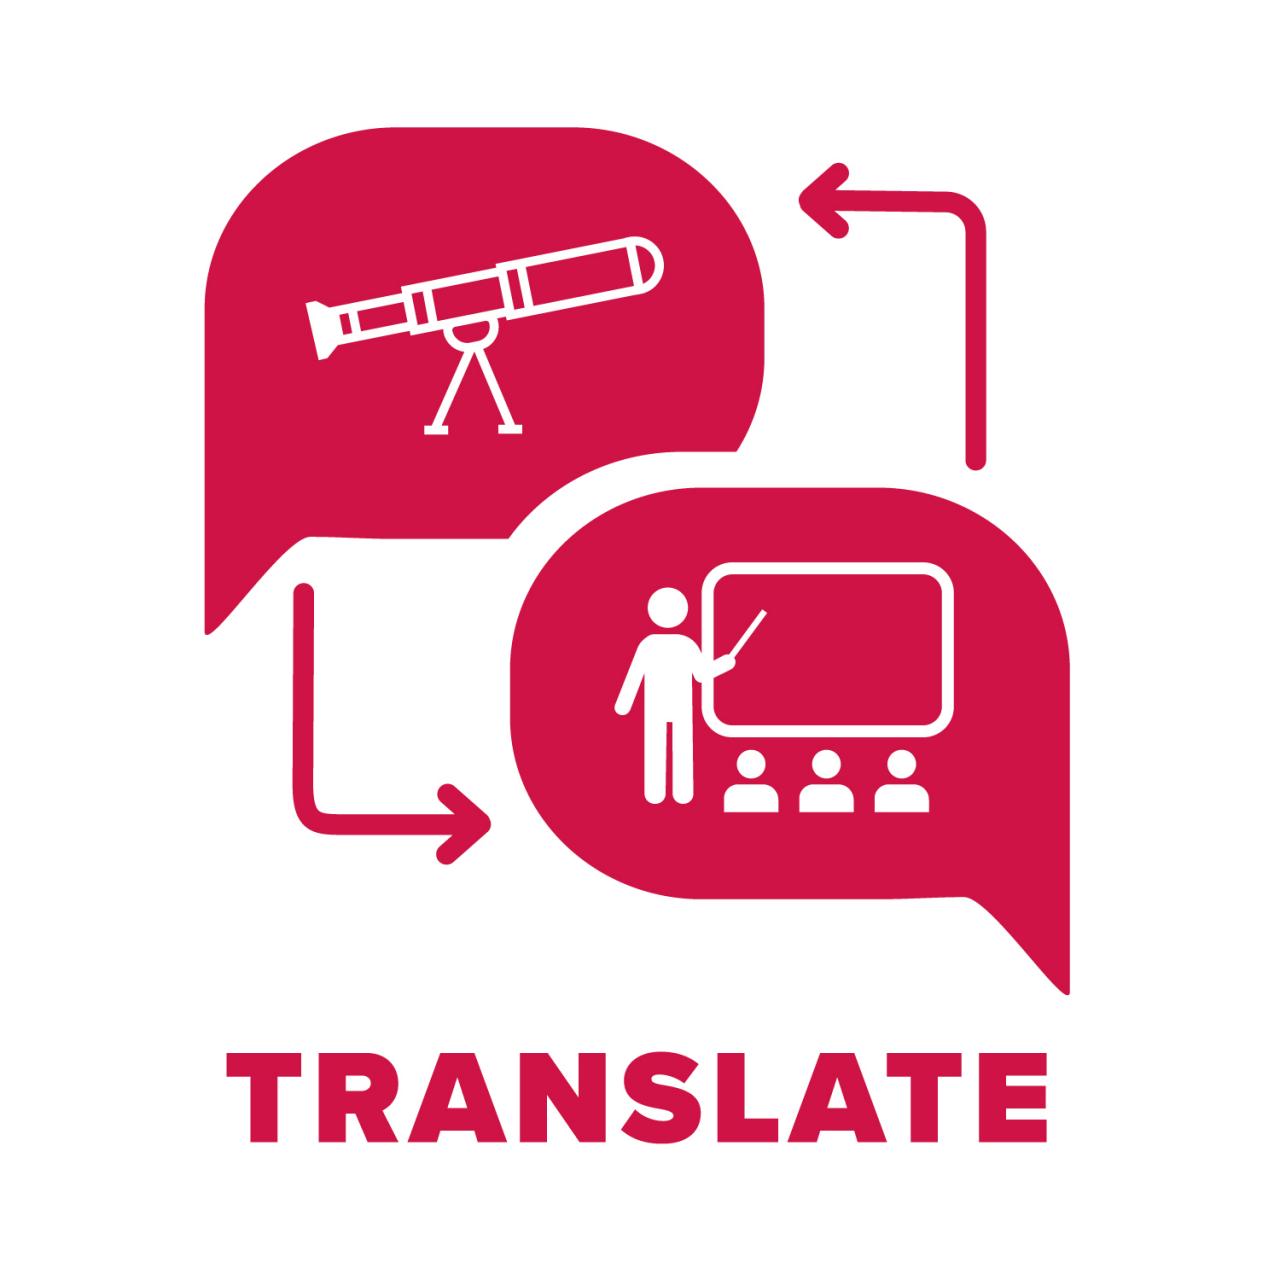 A red and white graphic with two bubbles, one with a telescope outline, the other with a person pointing at a board in front of an audience. There are arrows pointing in a clockwise direction to connect the bubbles. The title at the bottom says "Translate"